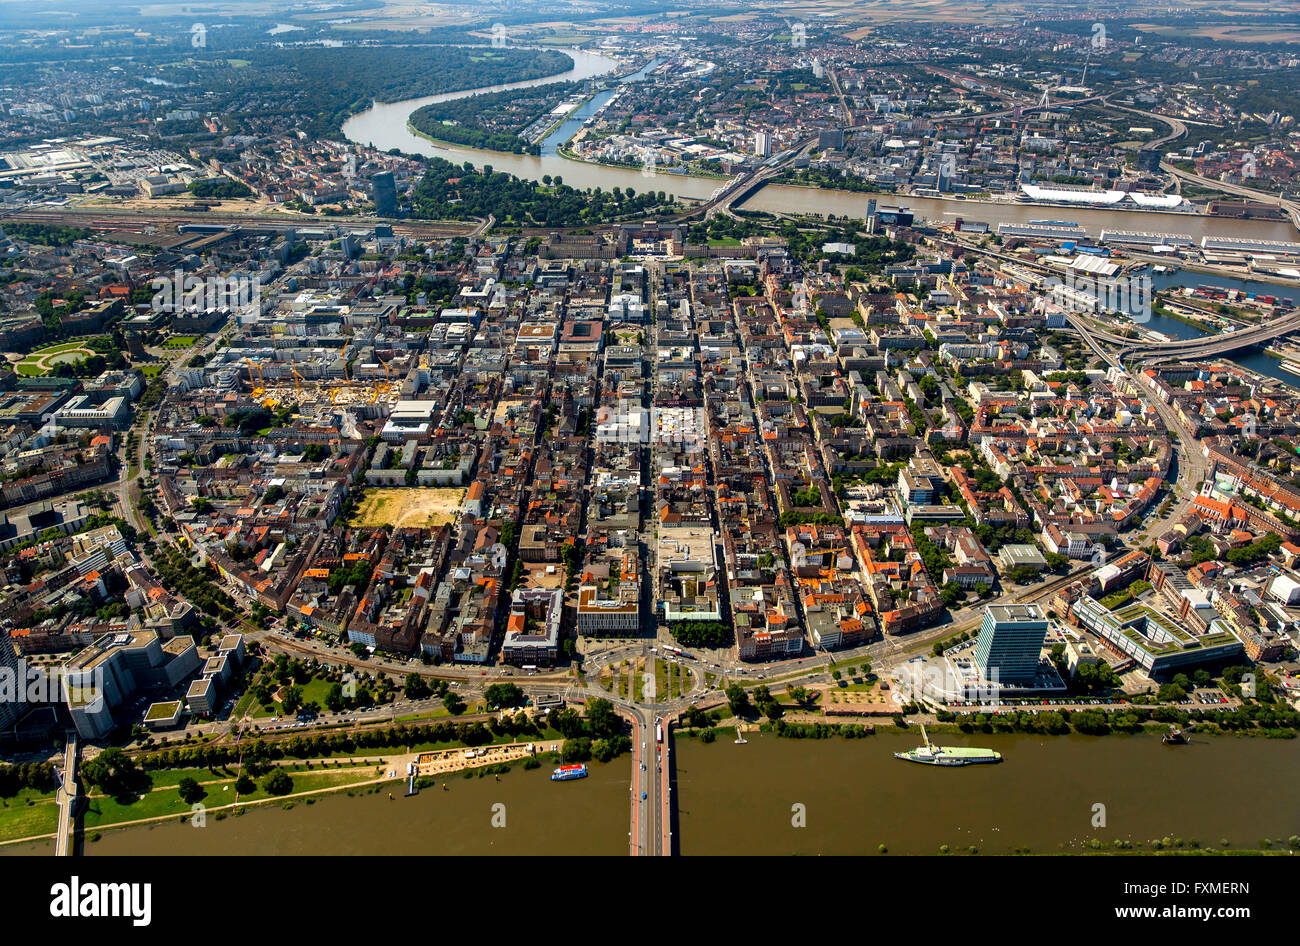 Aerial view, squares Mannheim, Old Town, overlooking the River Neckar in Mannheim, Mannheim, Baden-Württemberg, Germany, Europe, Stock Photo